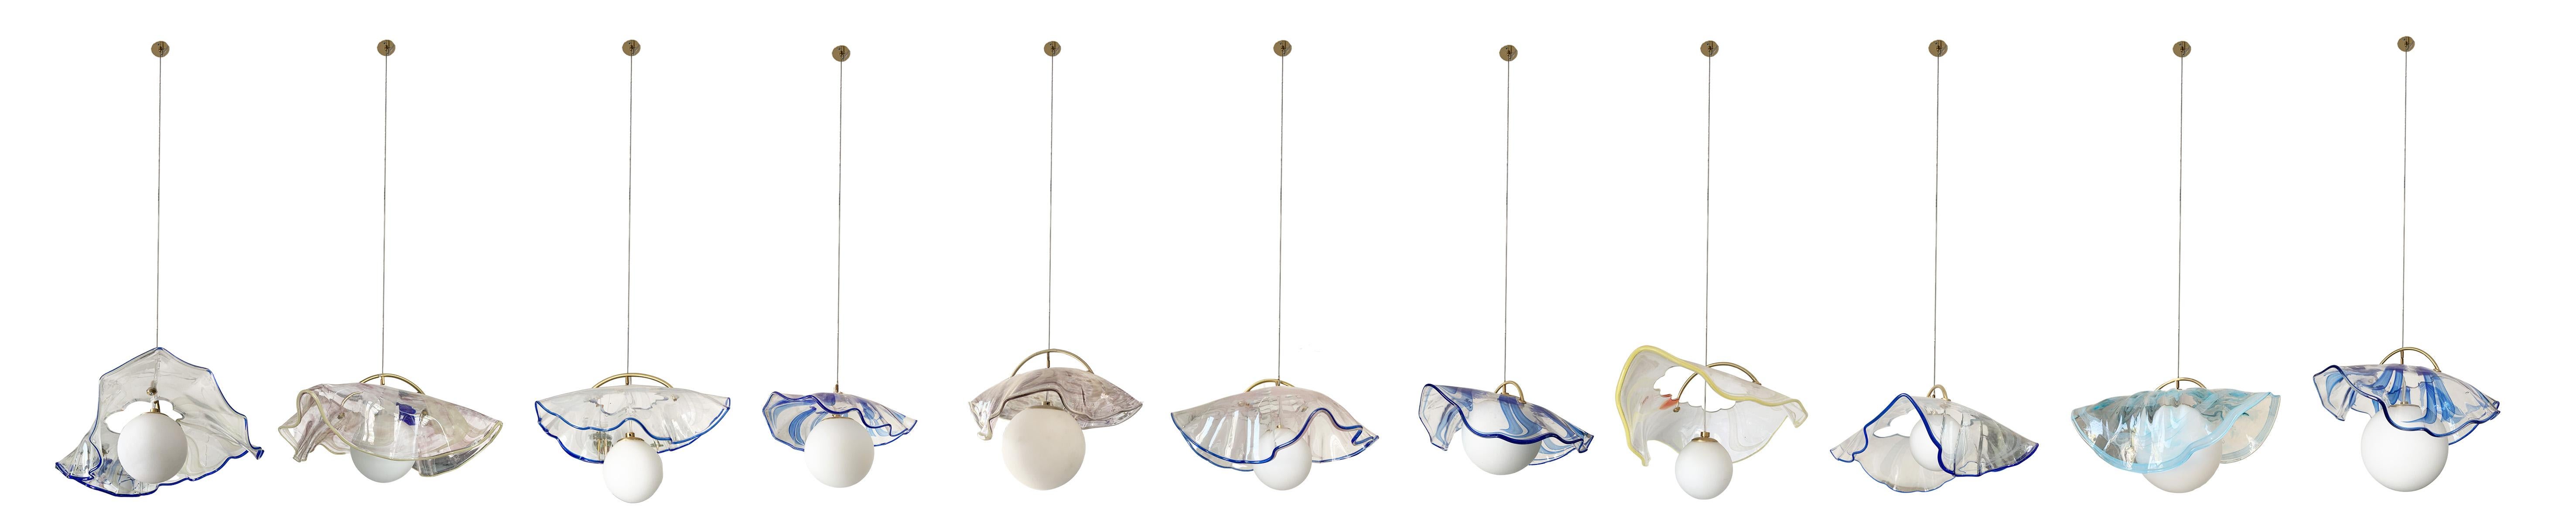 Jellyfish pendant lamp by Sema Topaloglu.

Jellyfish lamps are a collection, the price is for 5 items.

This product is hand-crafted therefore each production is unique and might not be exactly the same as visual.

 Lighting was part of the